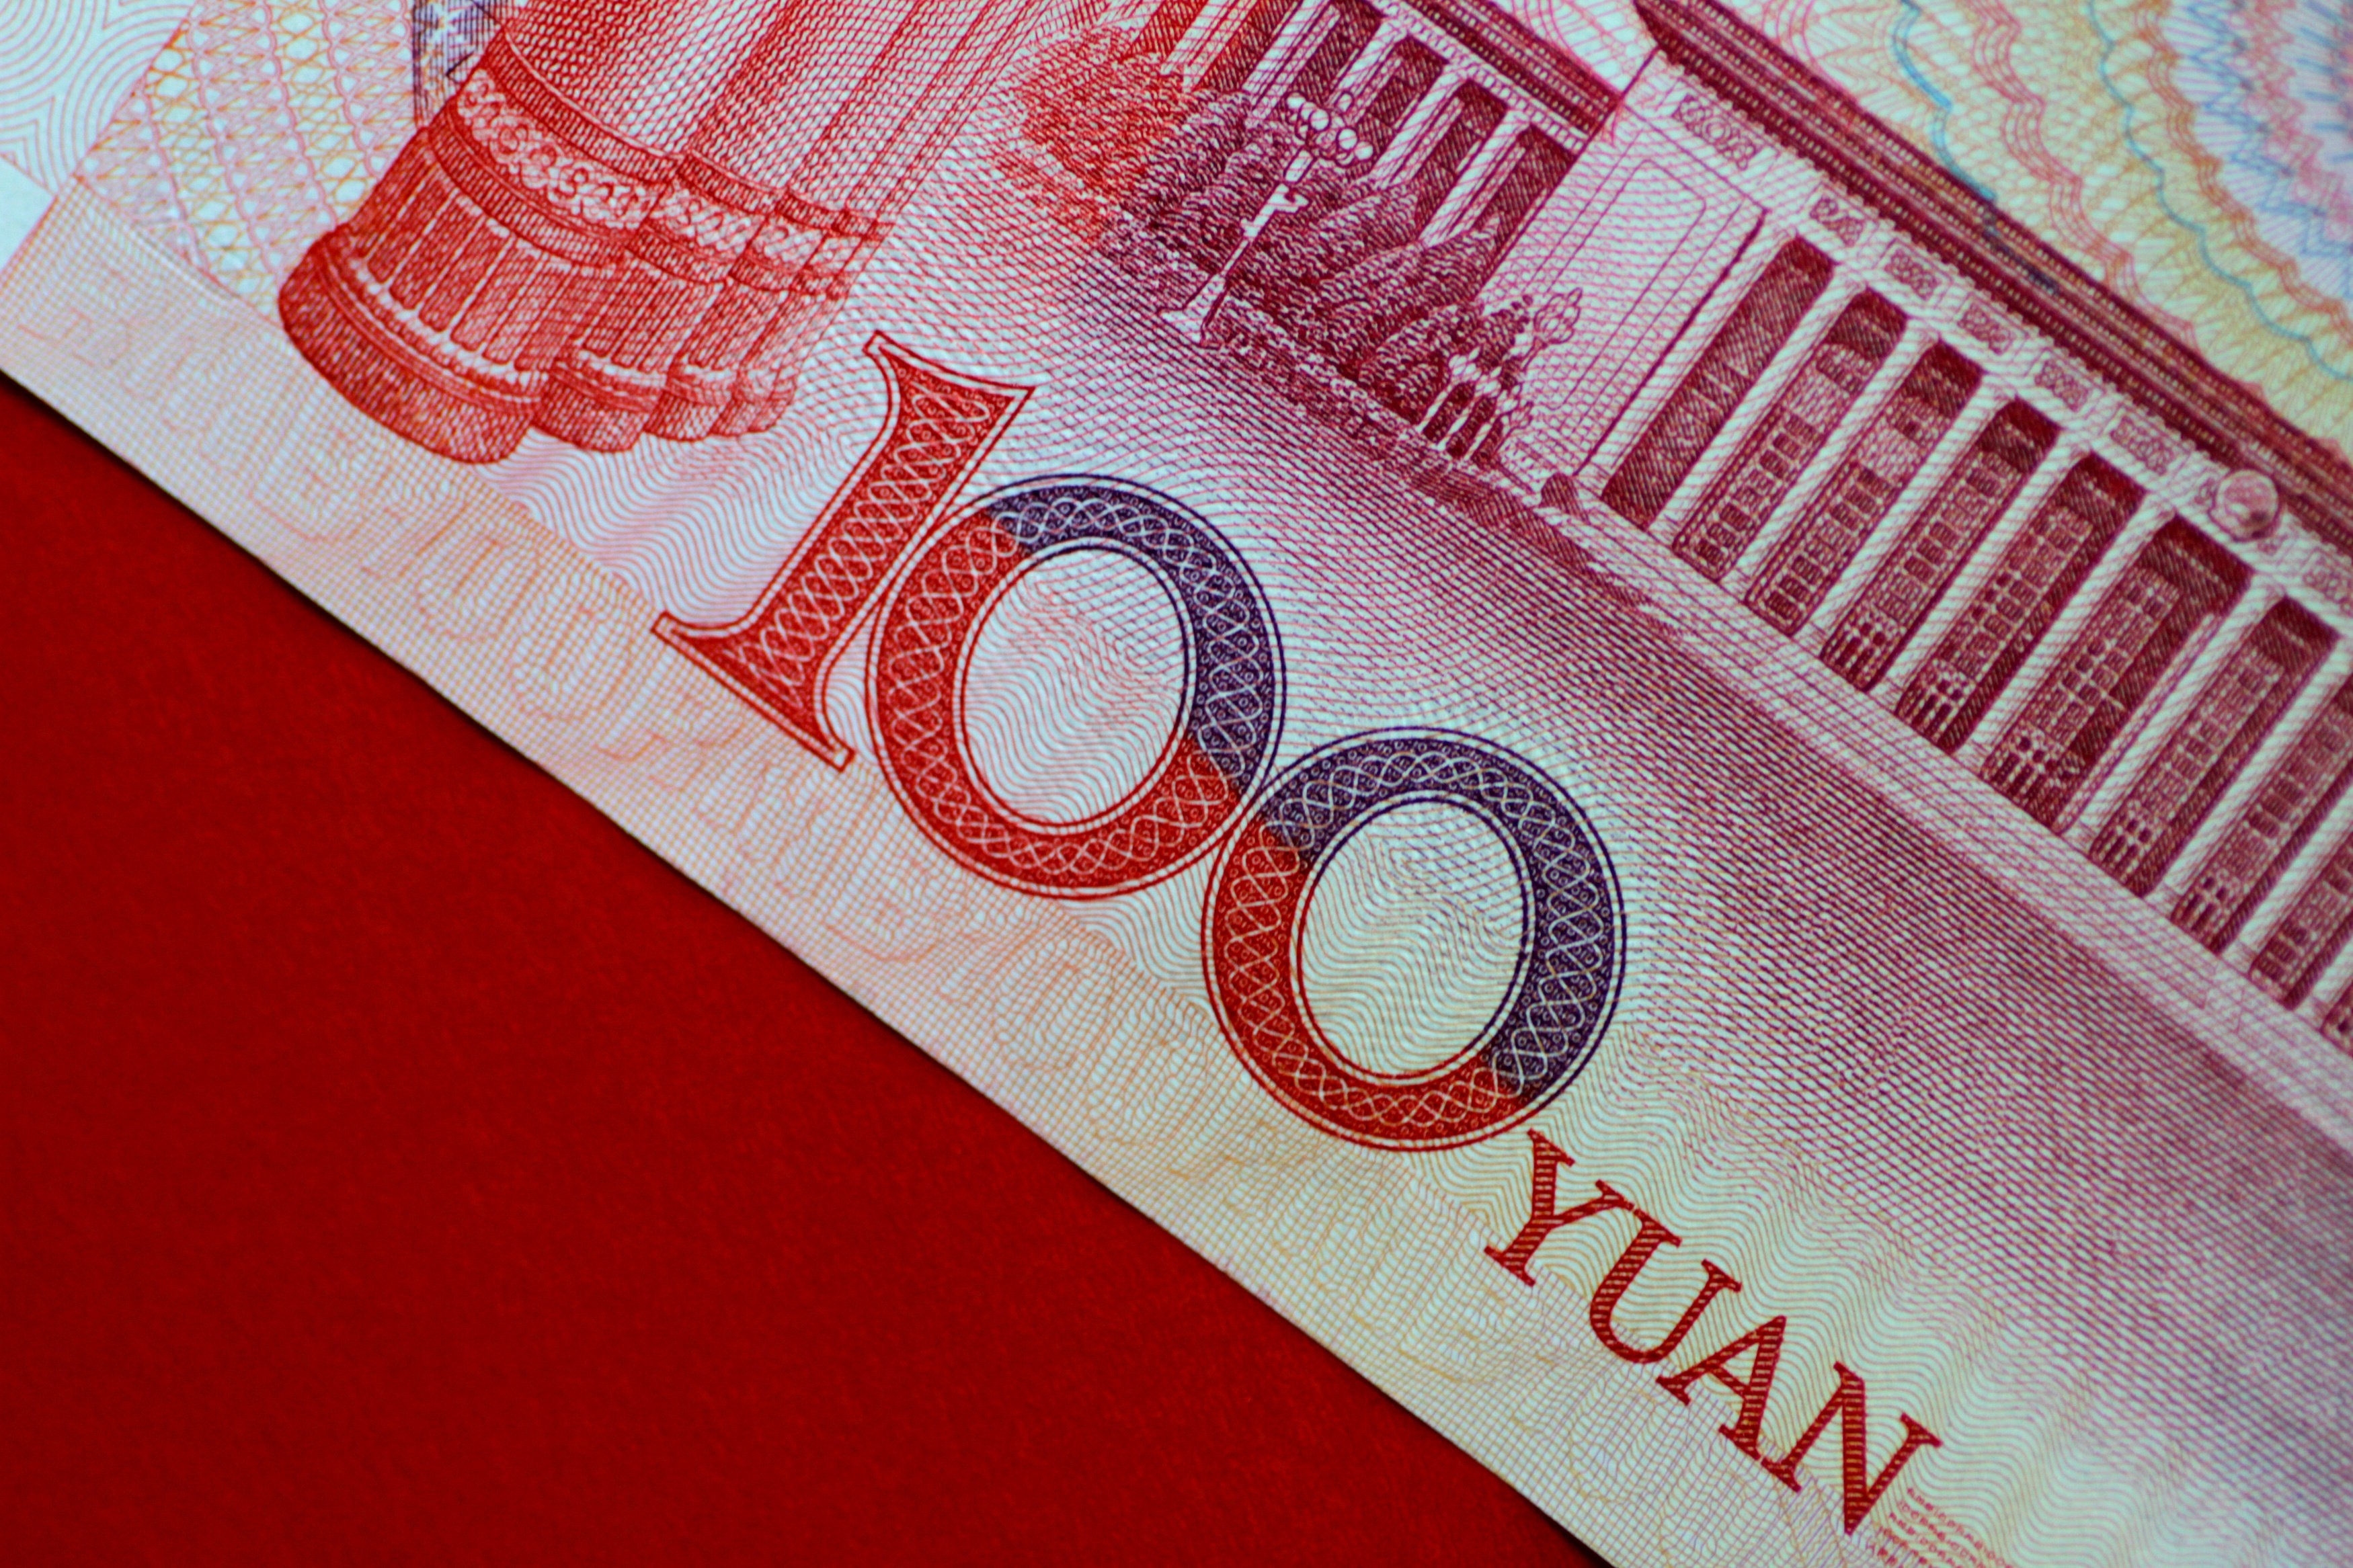 The yuan slid the most in more than two months against the US dollar on Tuesday after China removed the “counter-cyclical” factor from the reference rate formula. Photo: Reuters